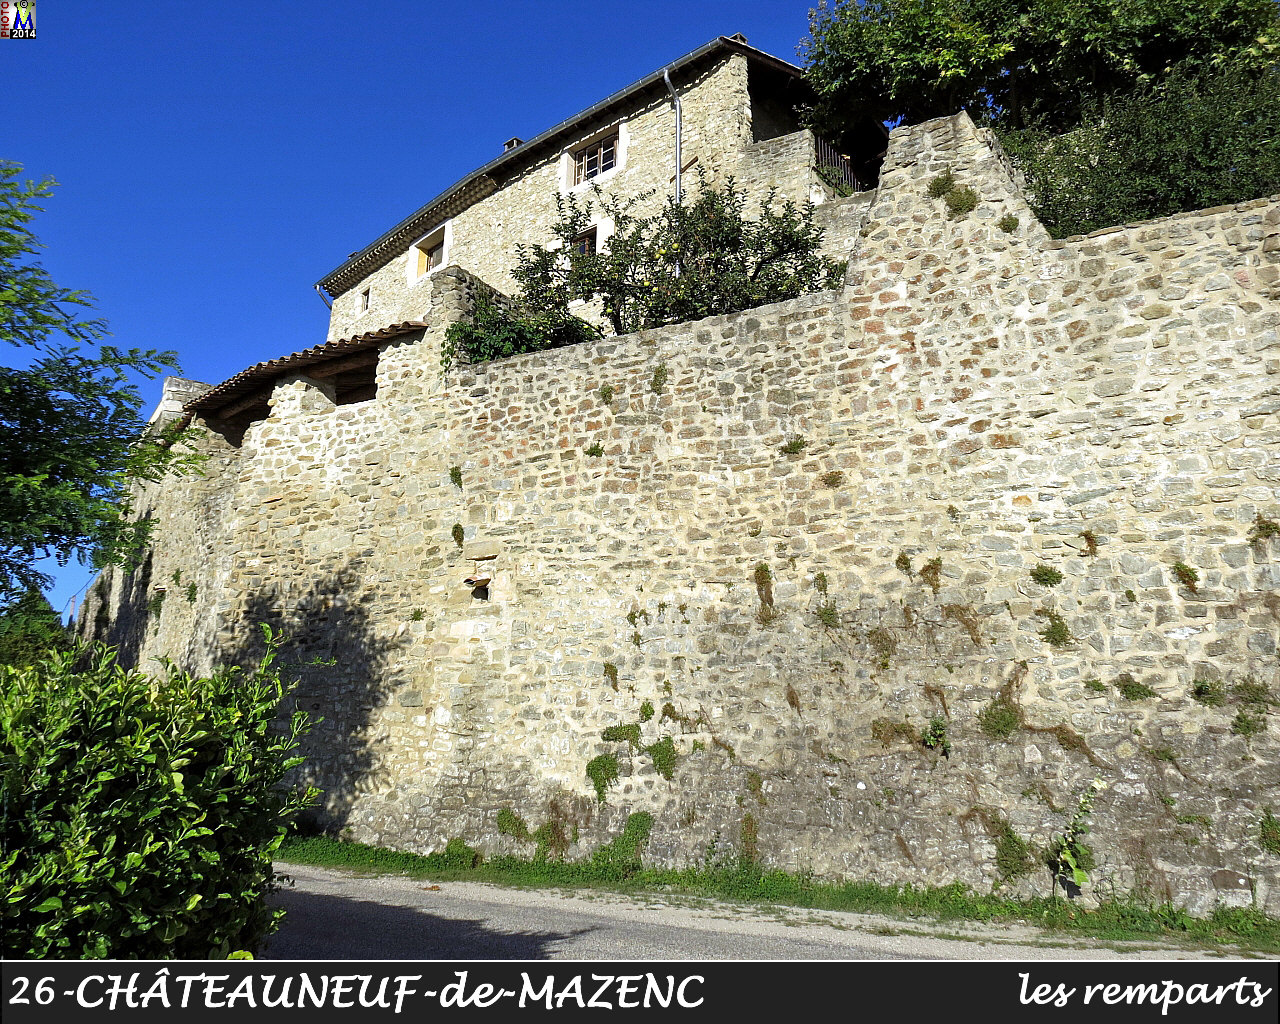 26BEGUDE-MAZENCzCHATEAUNEUF_remparts_100.jpg